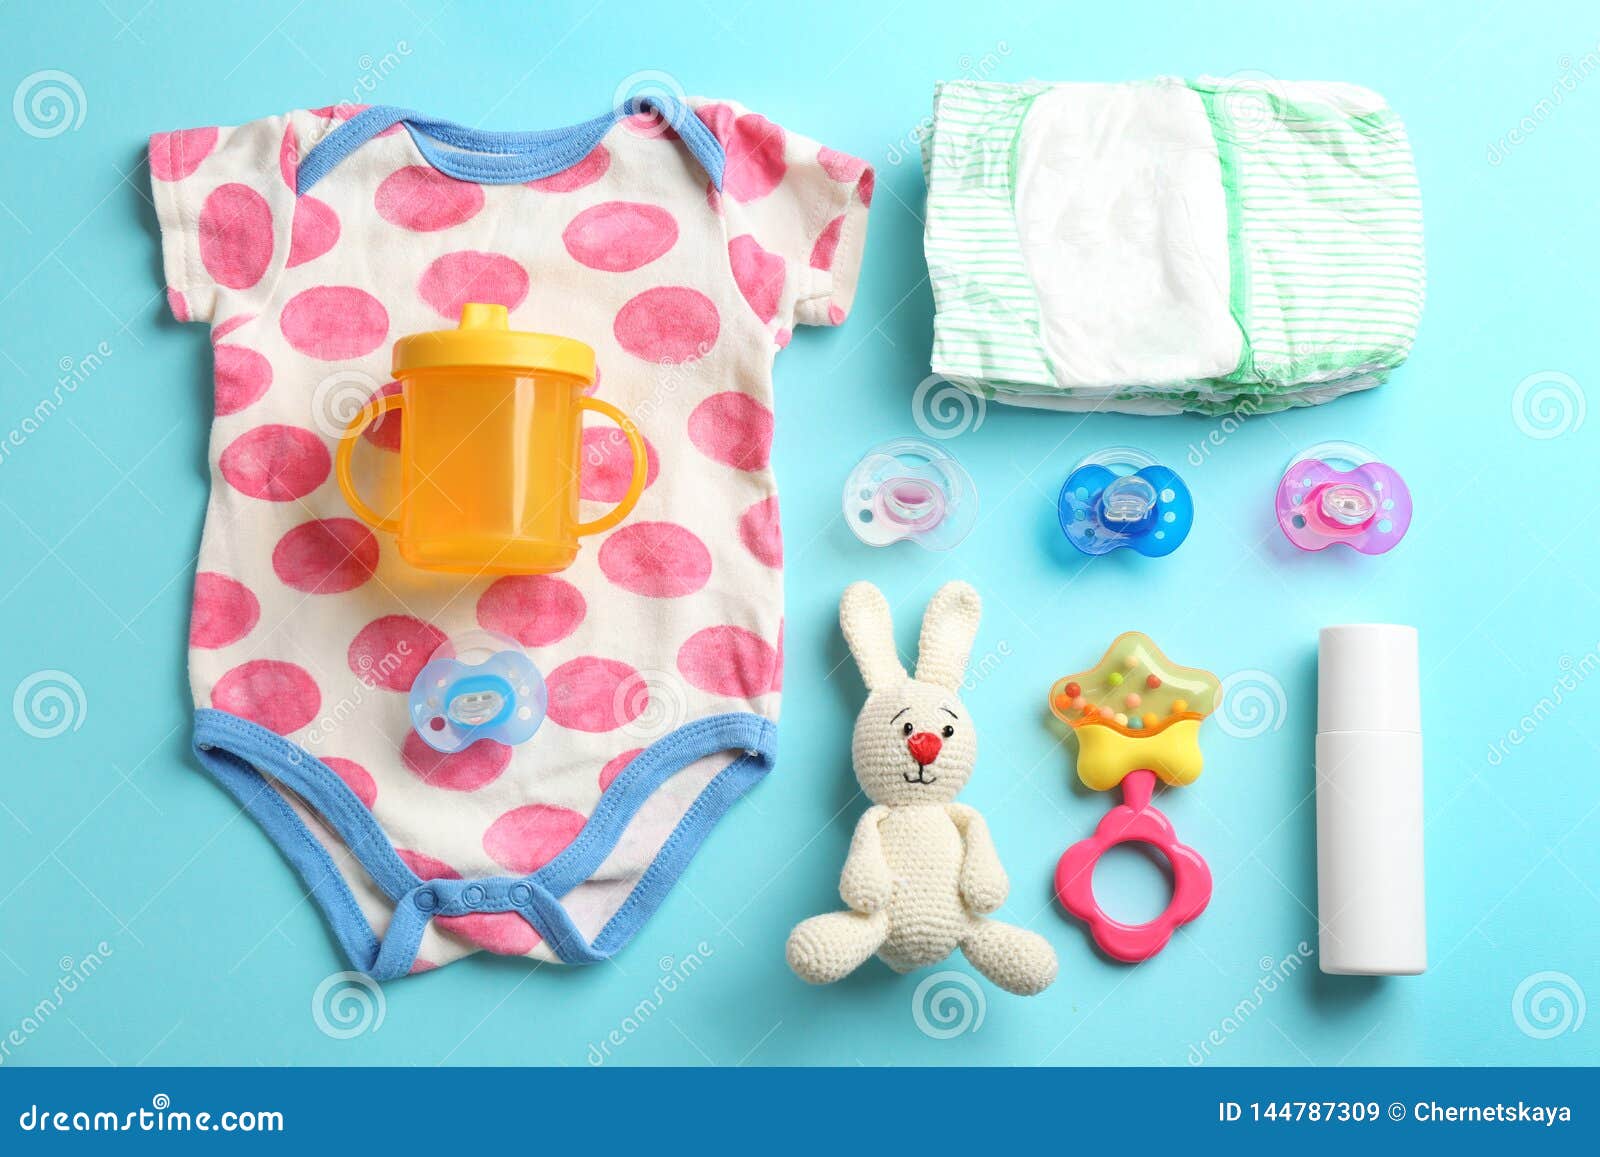 flat lay composition with baby accessories